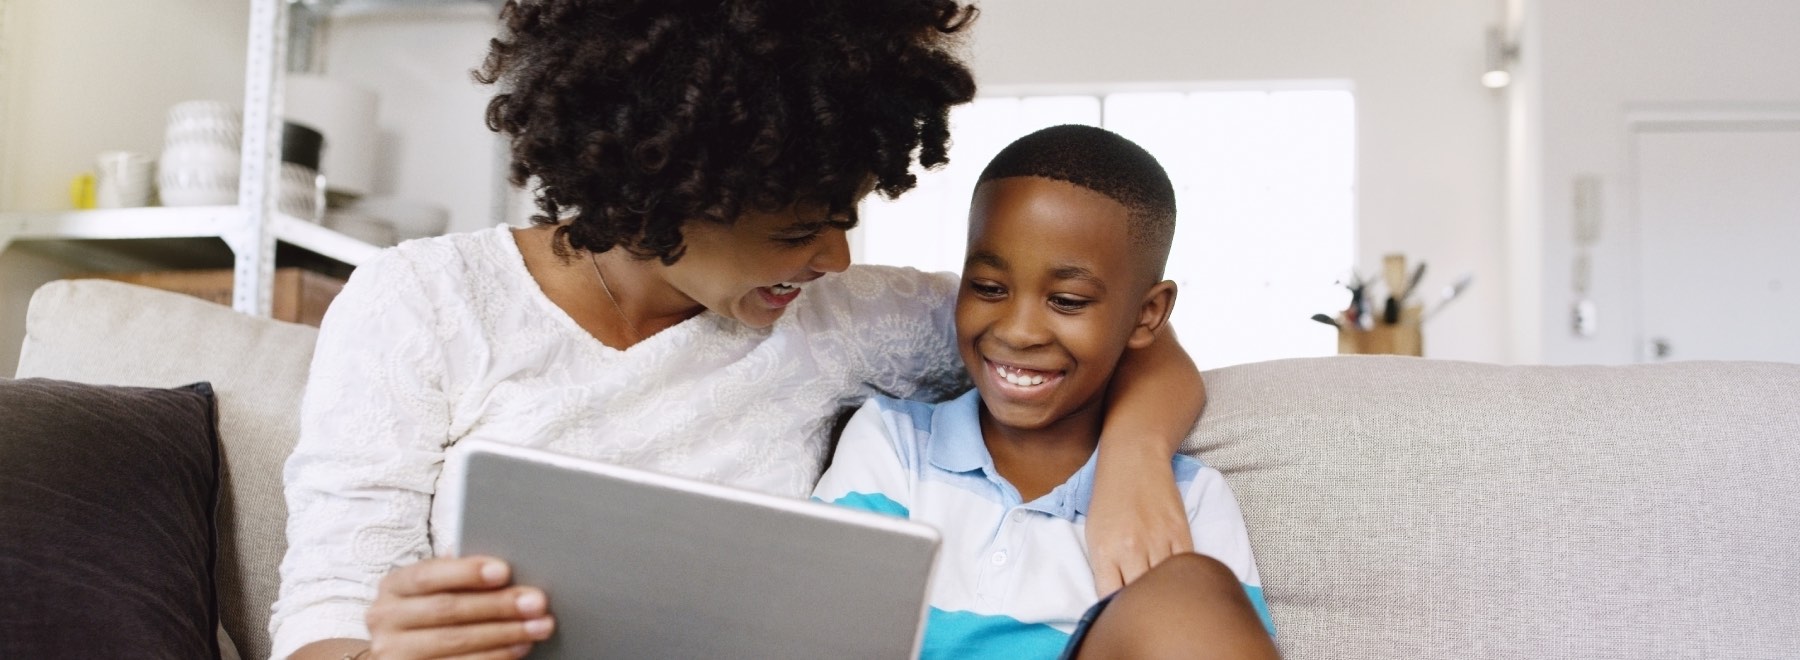 A smiling parent and child sit on the couch while looking at a survey on a tablet.